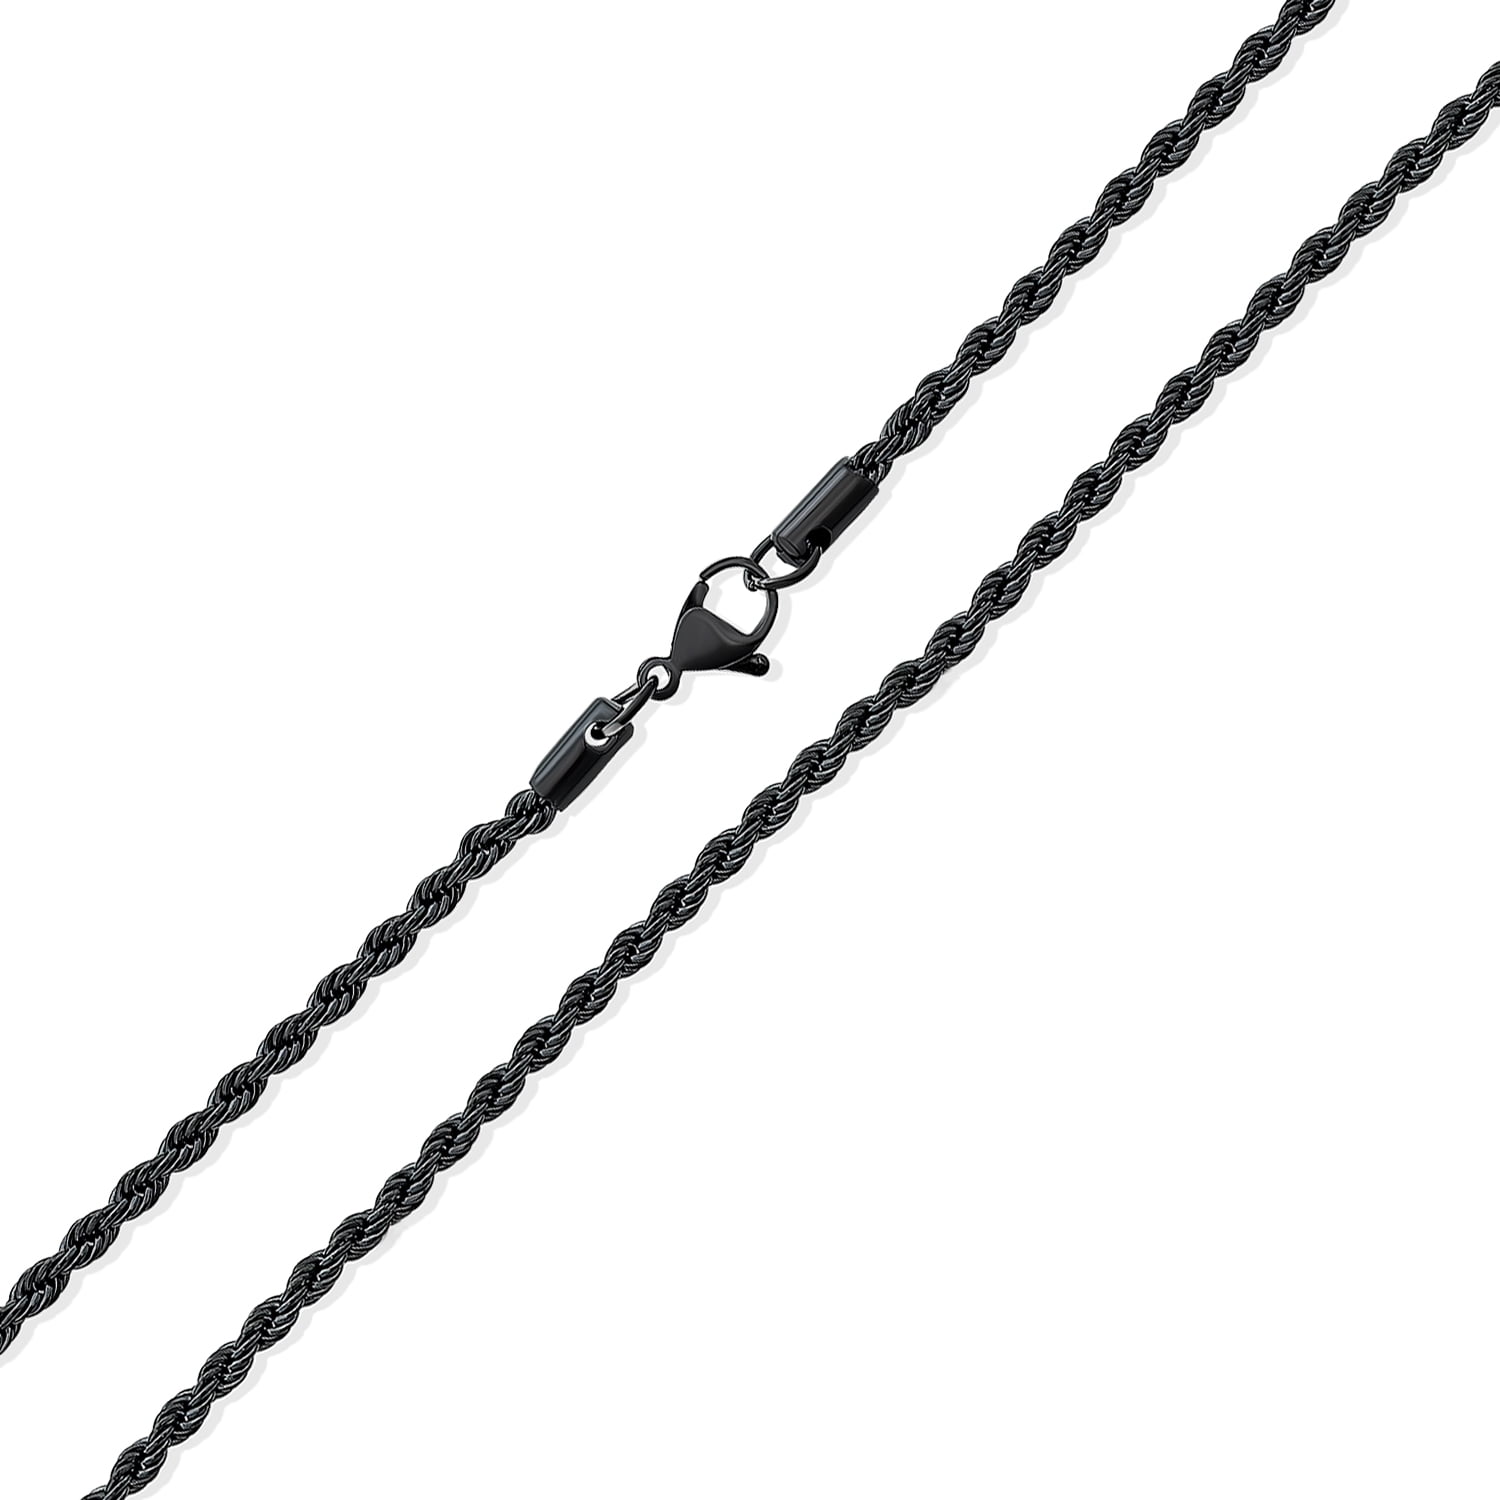 4mm 18"-40" Black Stainless Steel Rope Necklace Chain Sb92 USA Seller 